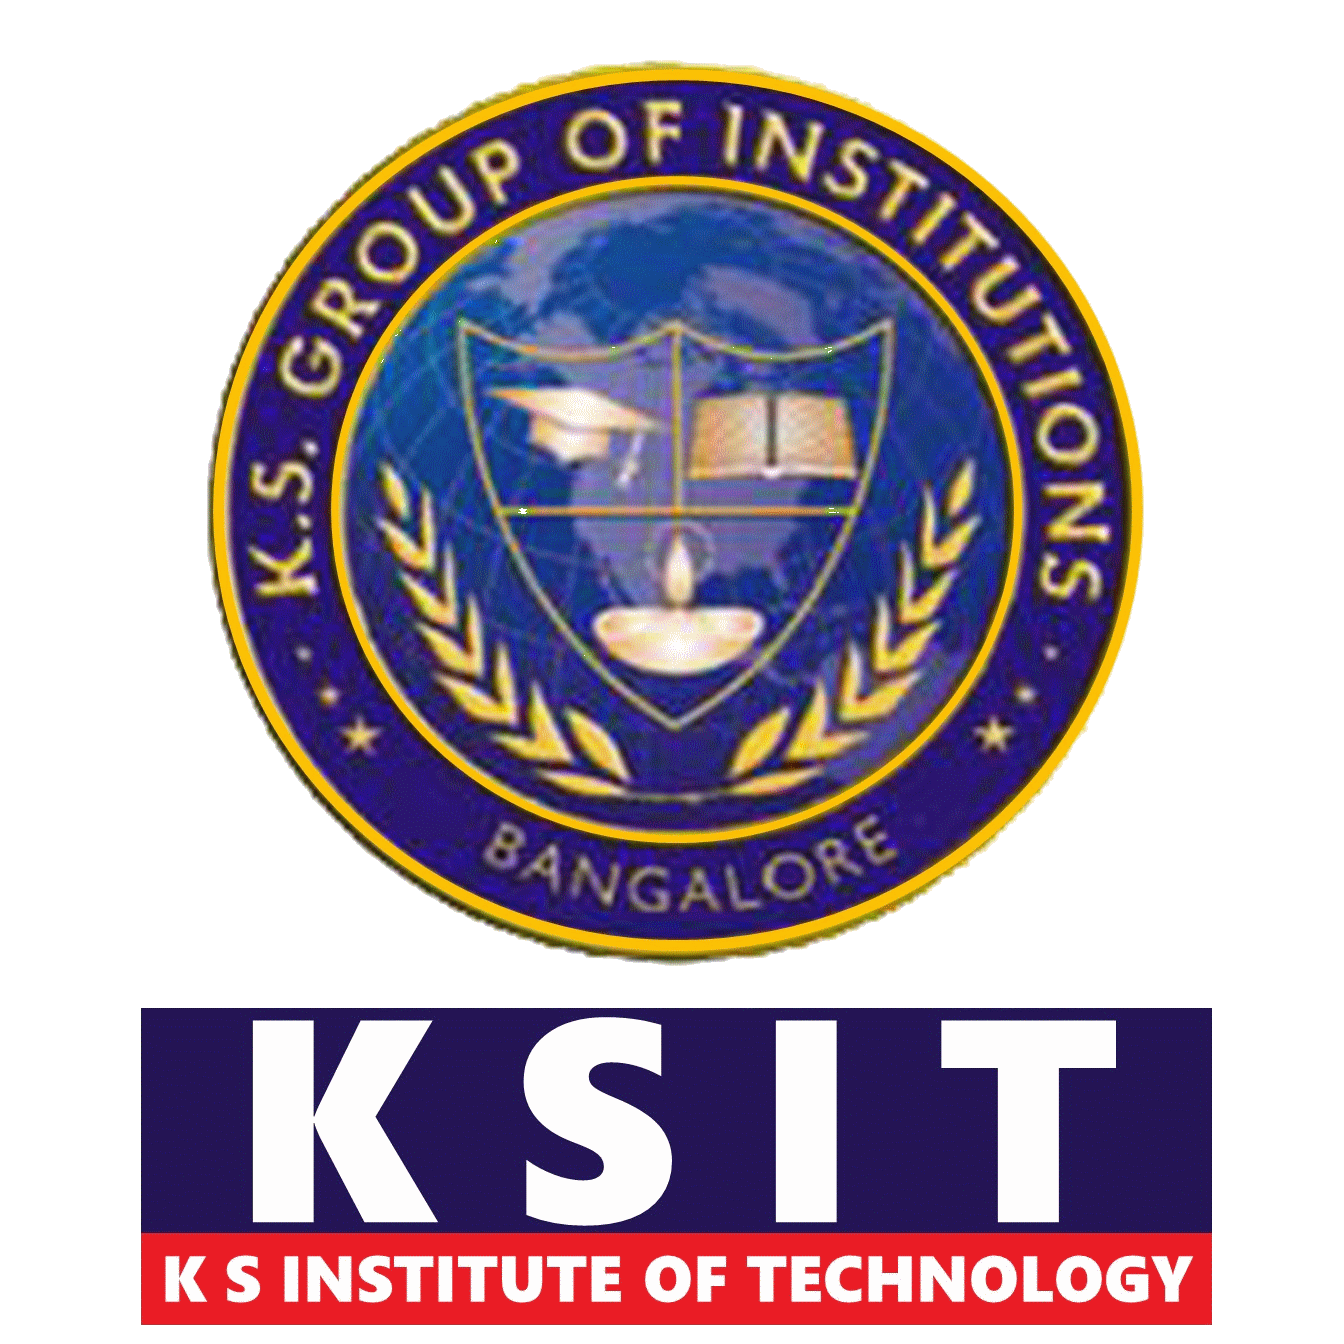 K.S. INSTITUTE OF TECHNOLOGY